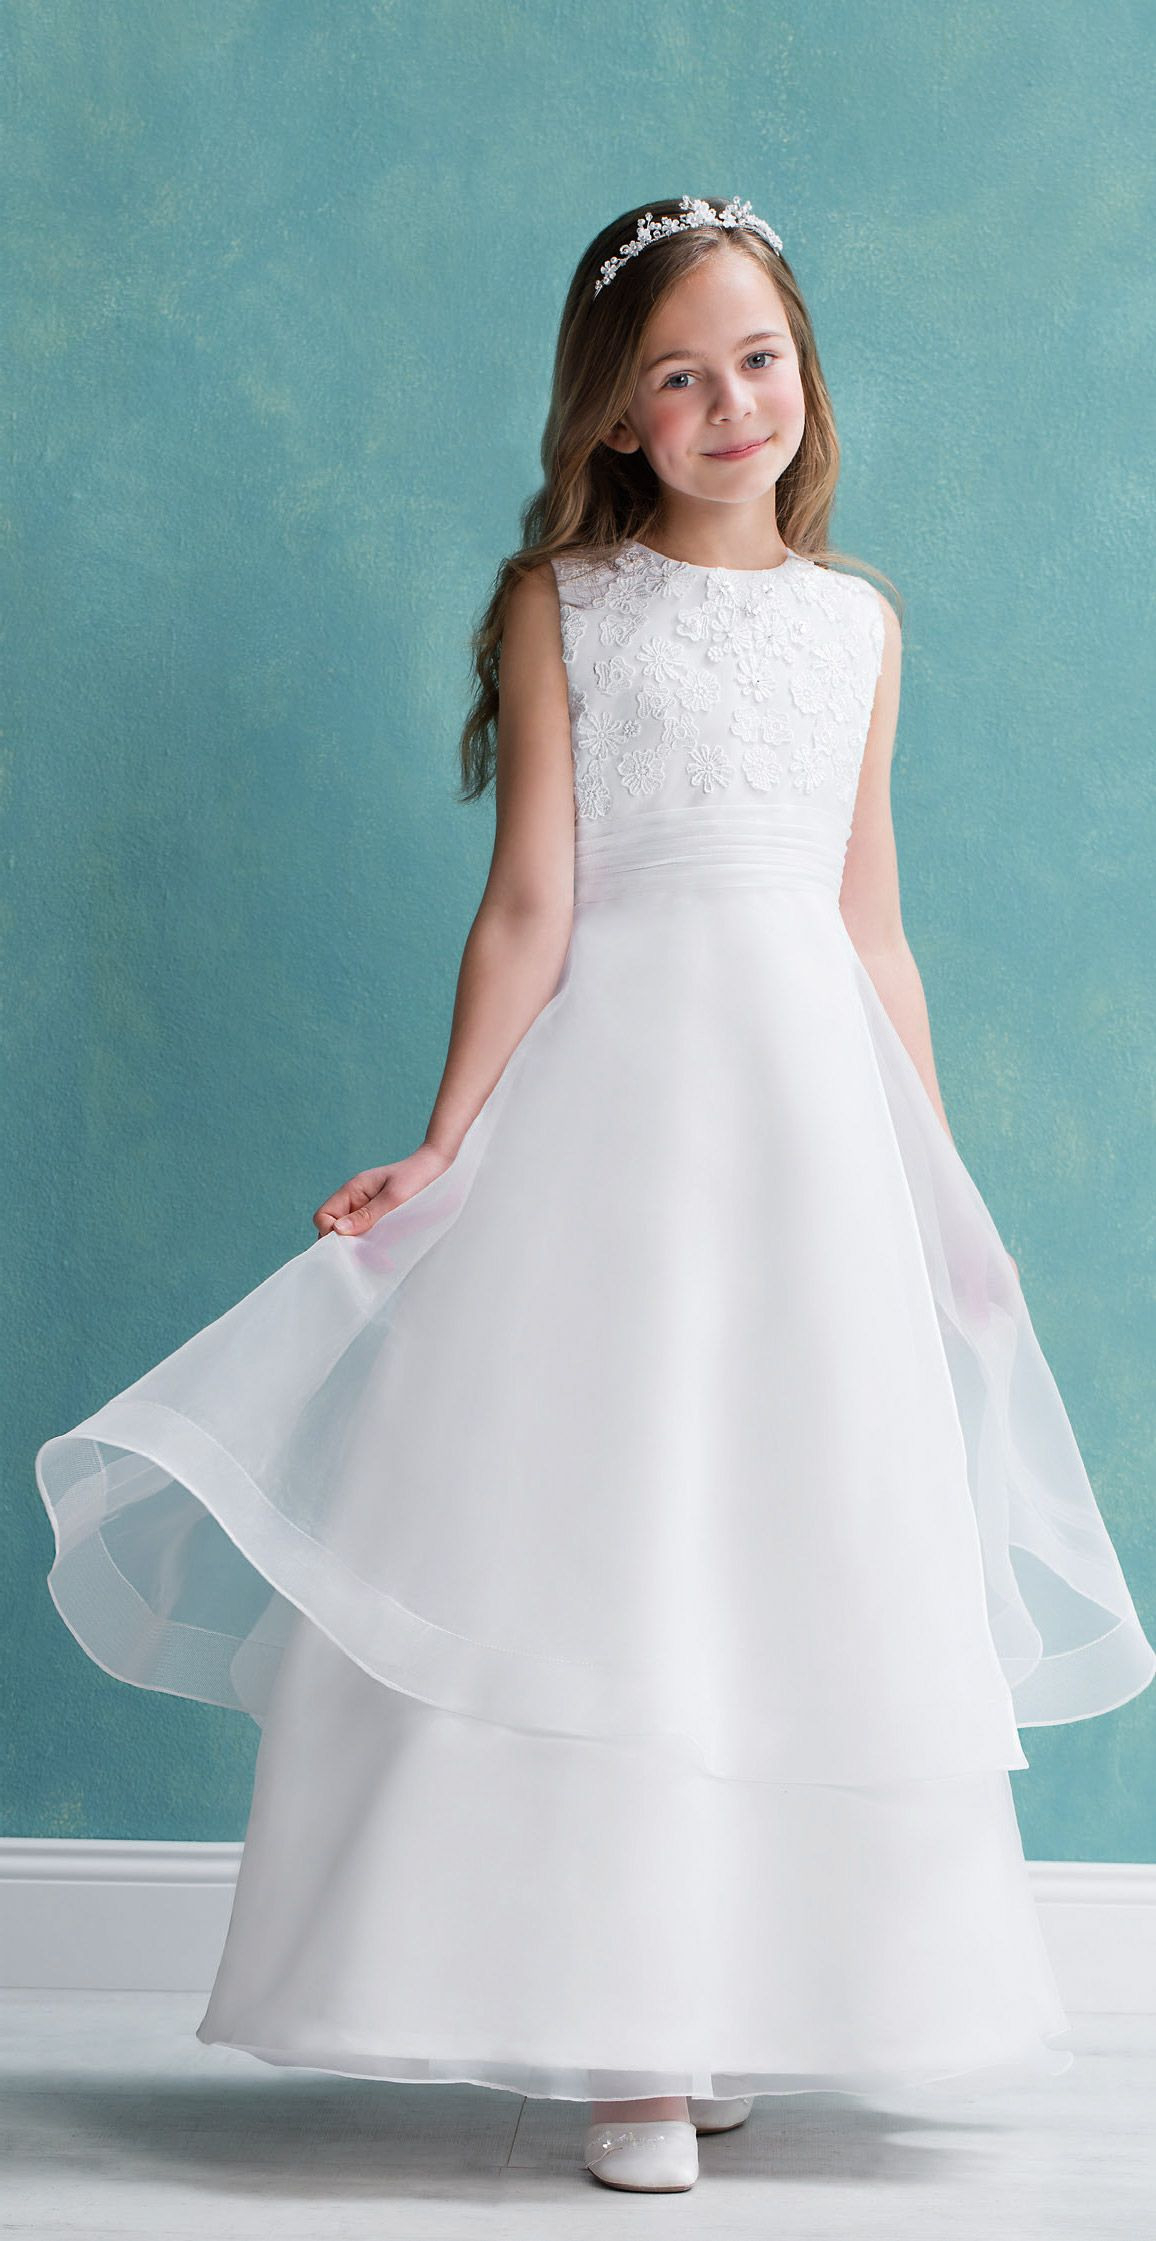 Stunning Lace And Organza Dress The Tulle Underskirt Adds